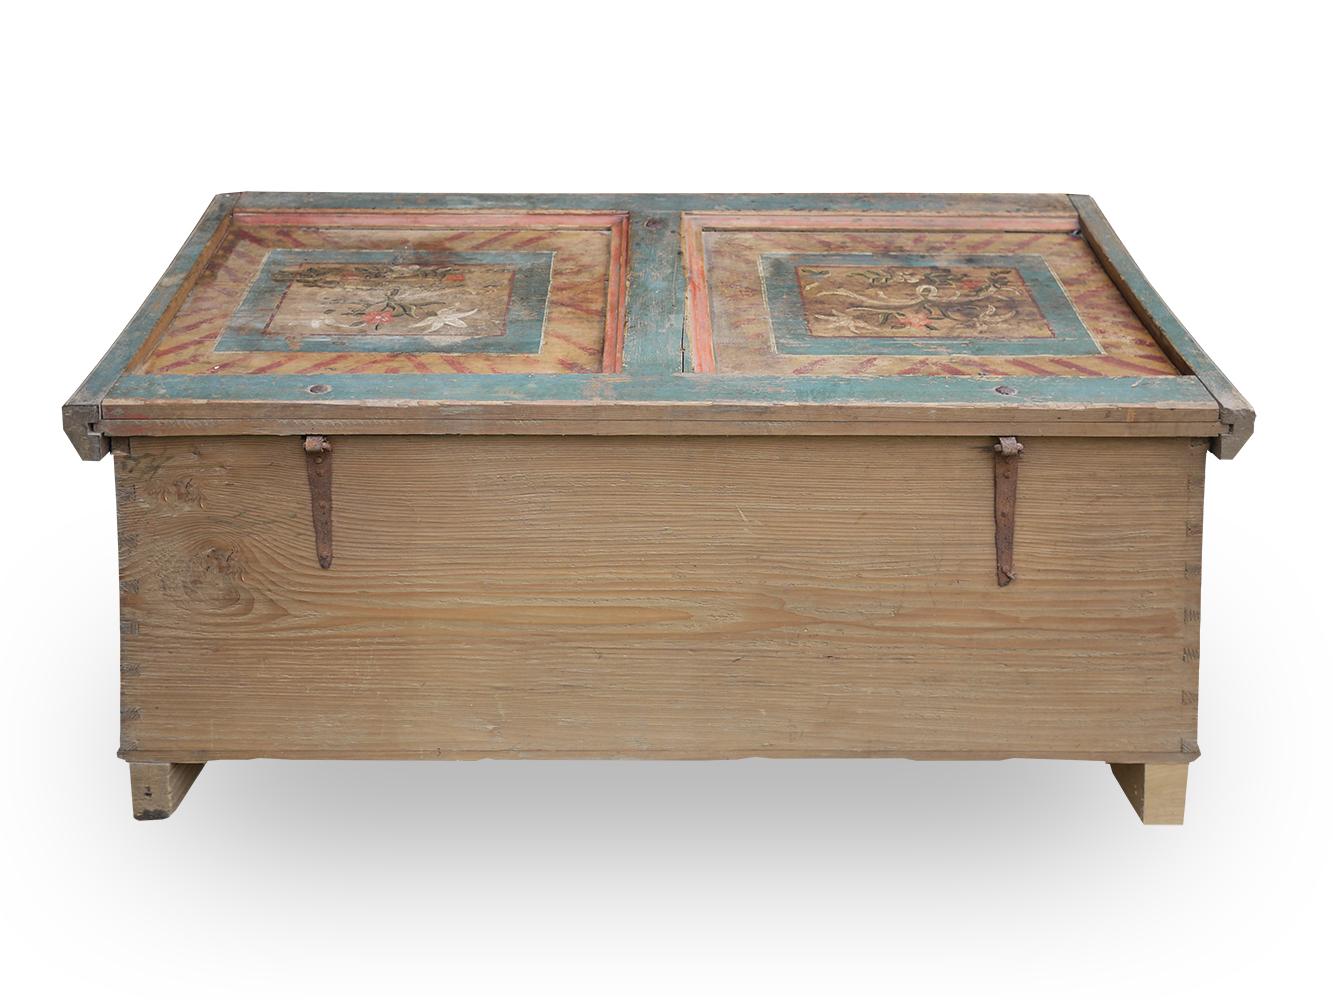 Italian Blu Floral Painted Blanket Chest, Italy, 1812